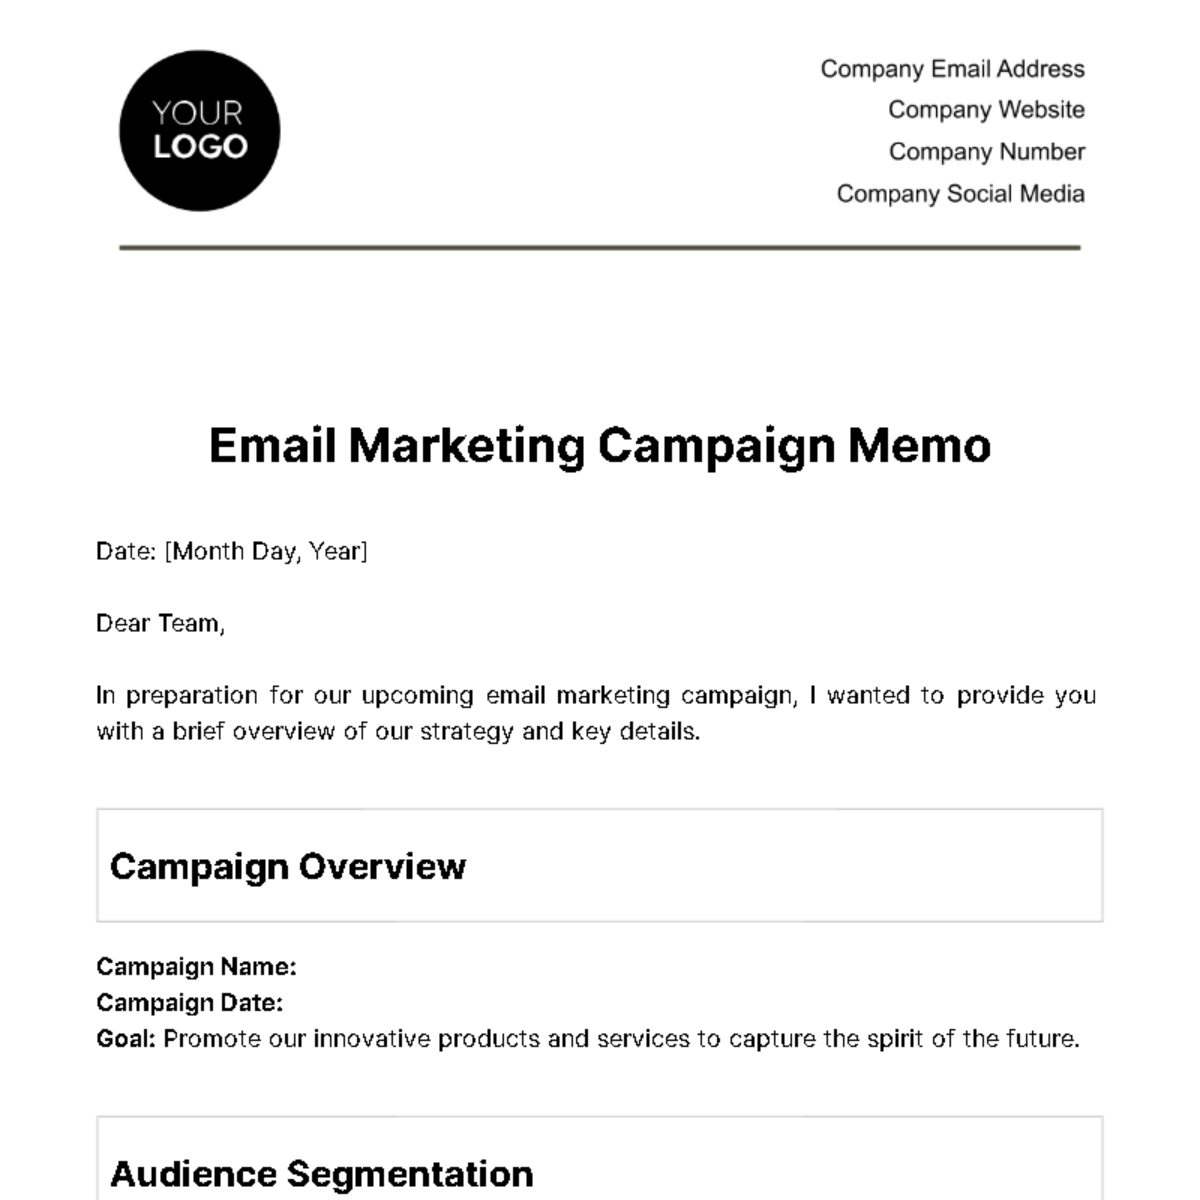 Free Email Marketing Campaign Memo Template